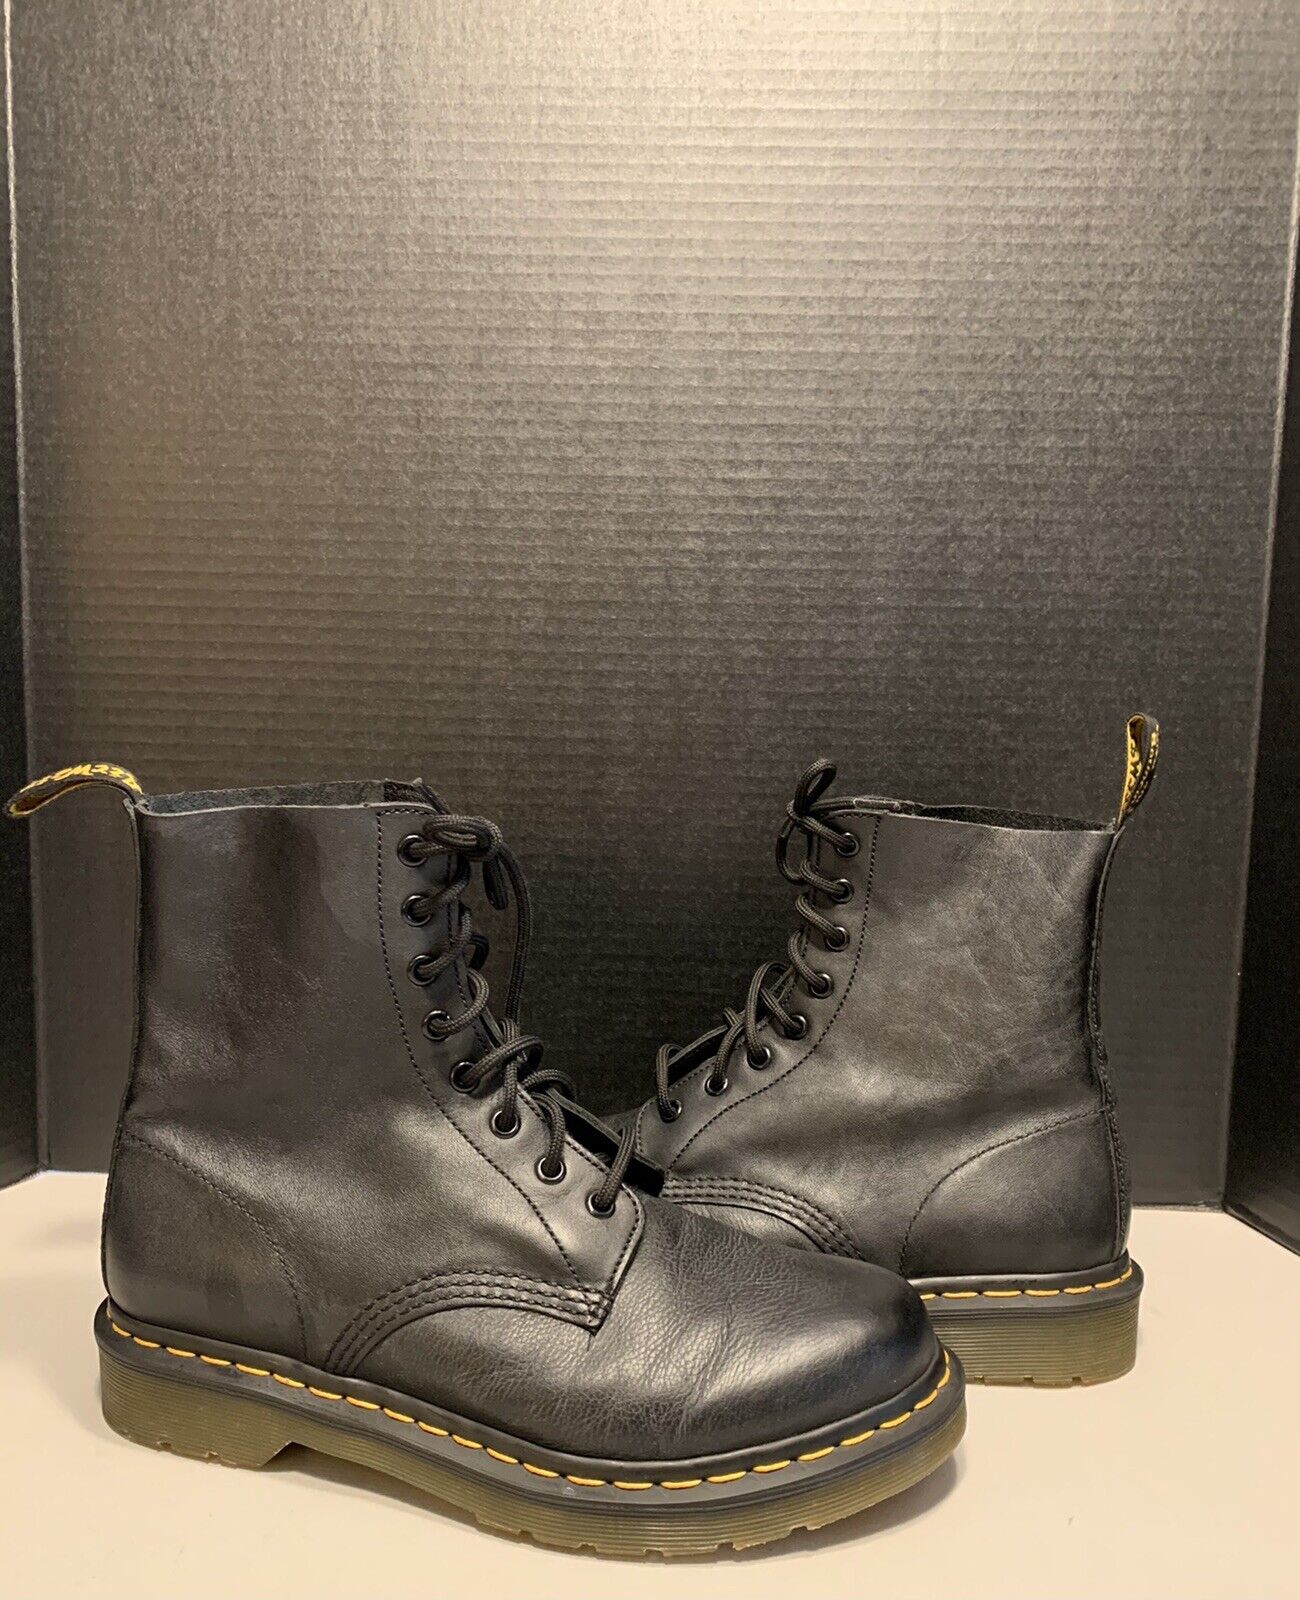 Dr. Pascal Leather Boots Size US W 9 - Black - eBay